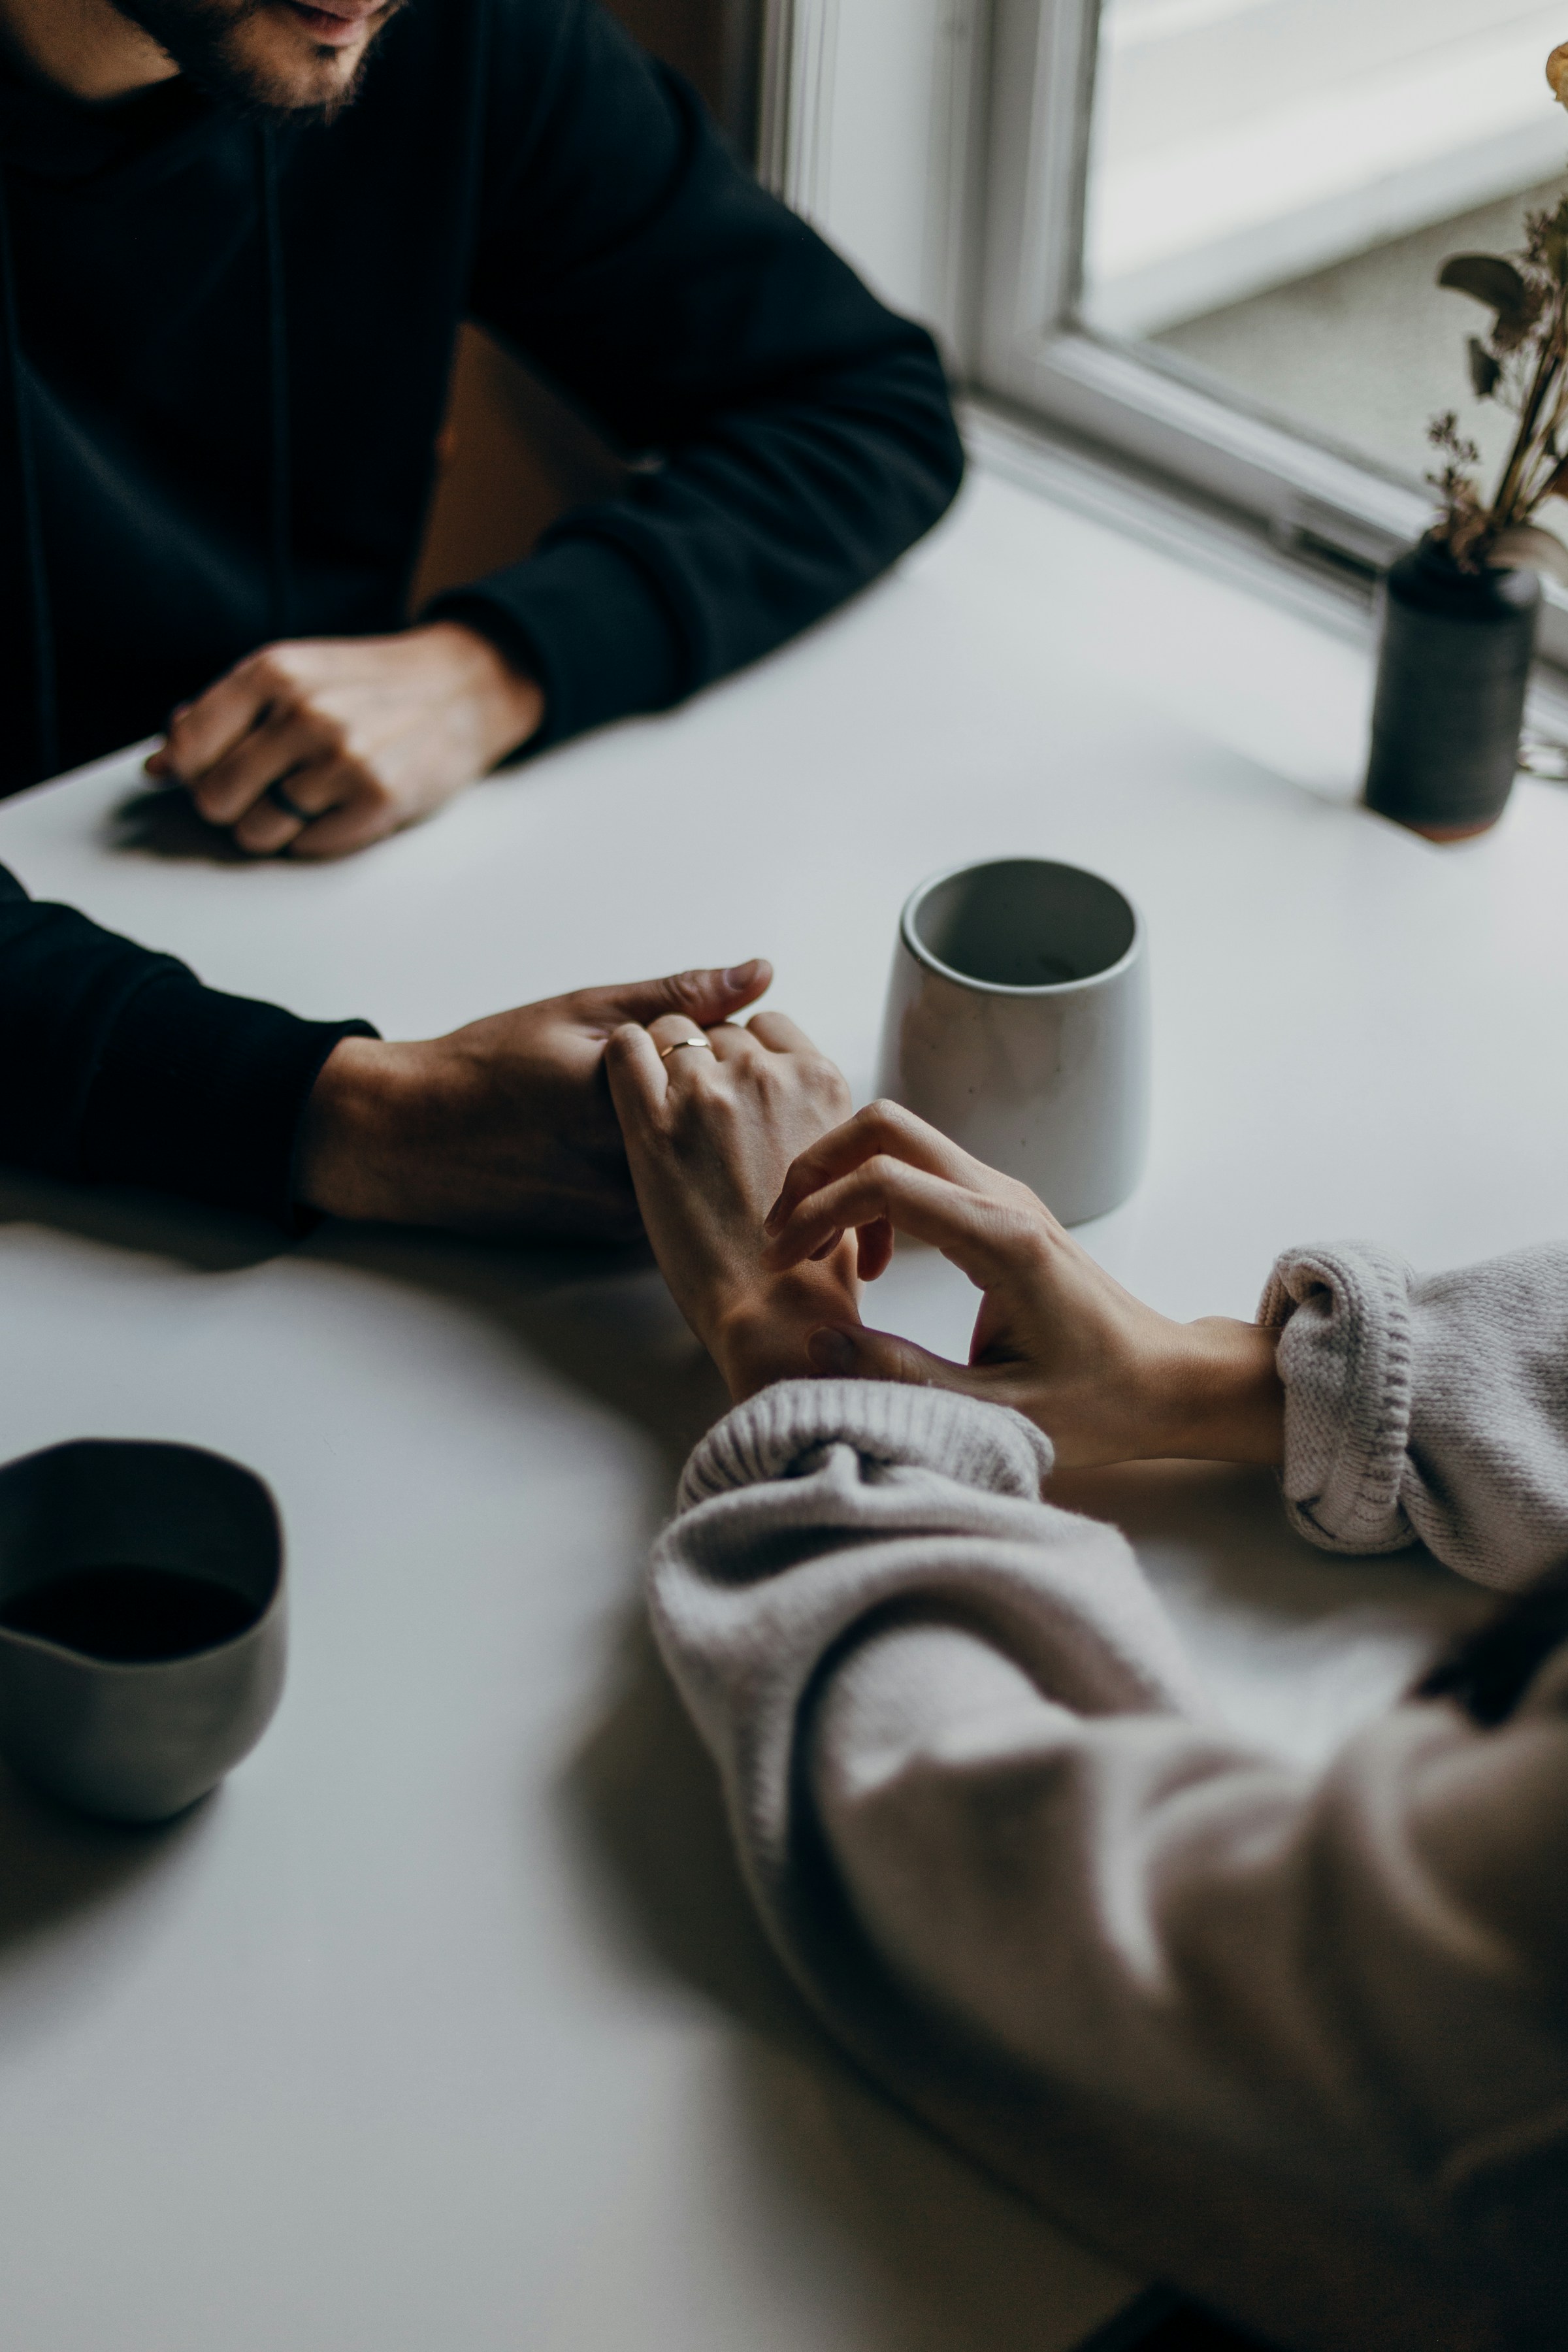 A couple sitting at a table and holding hands | Source: Unsplash